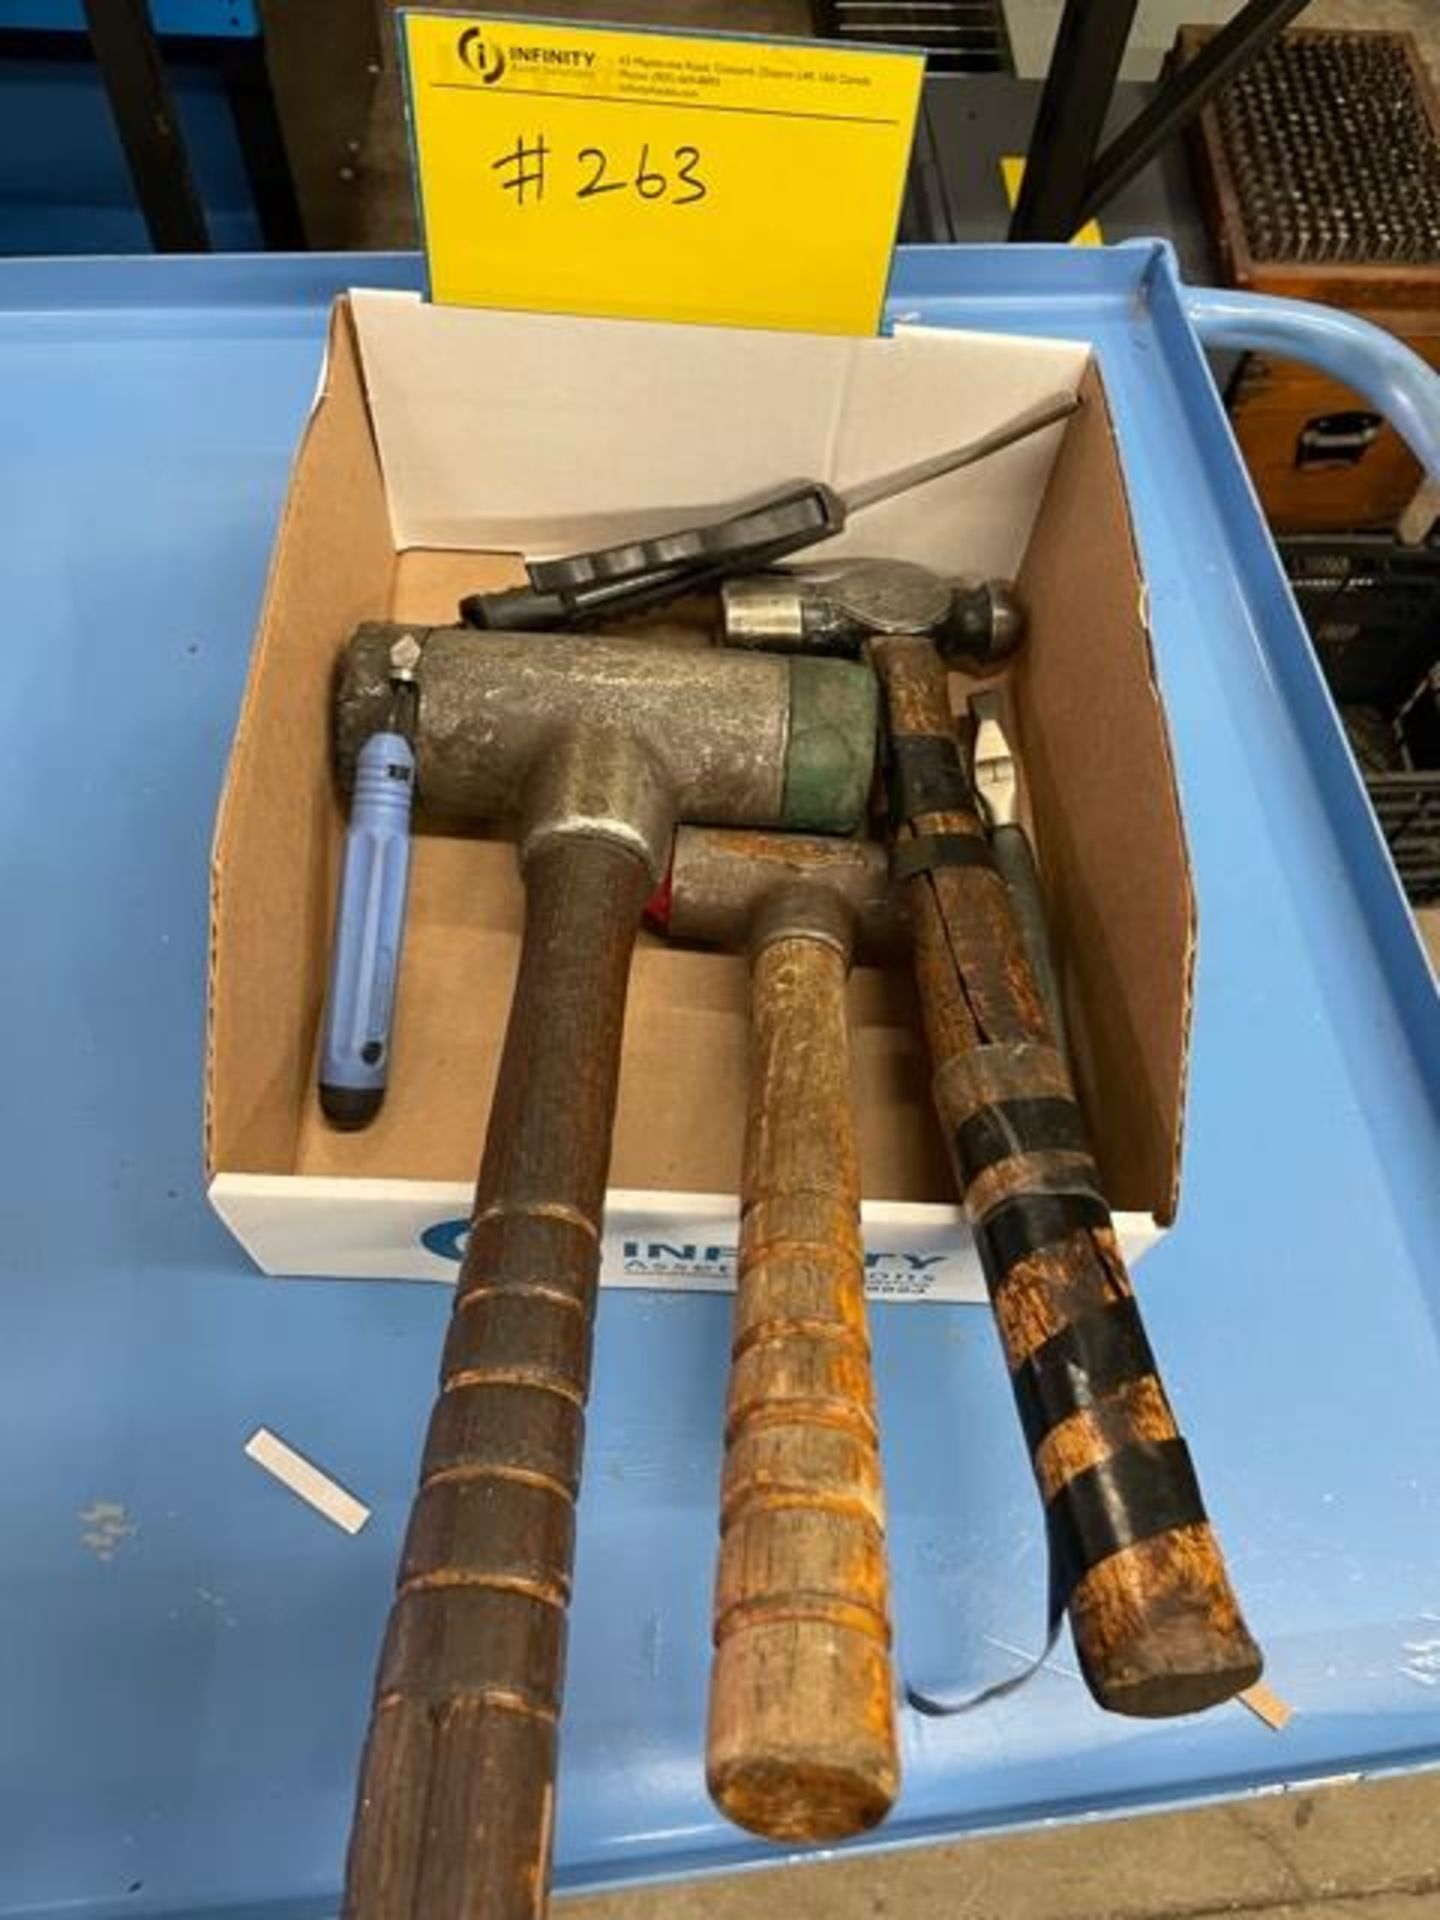 Rubber mallets, hammers and chamfering tool